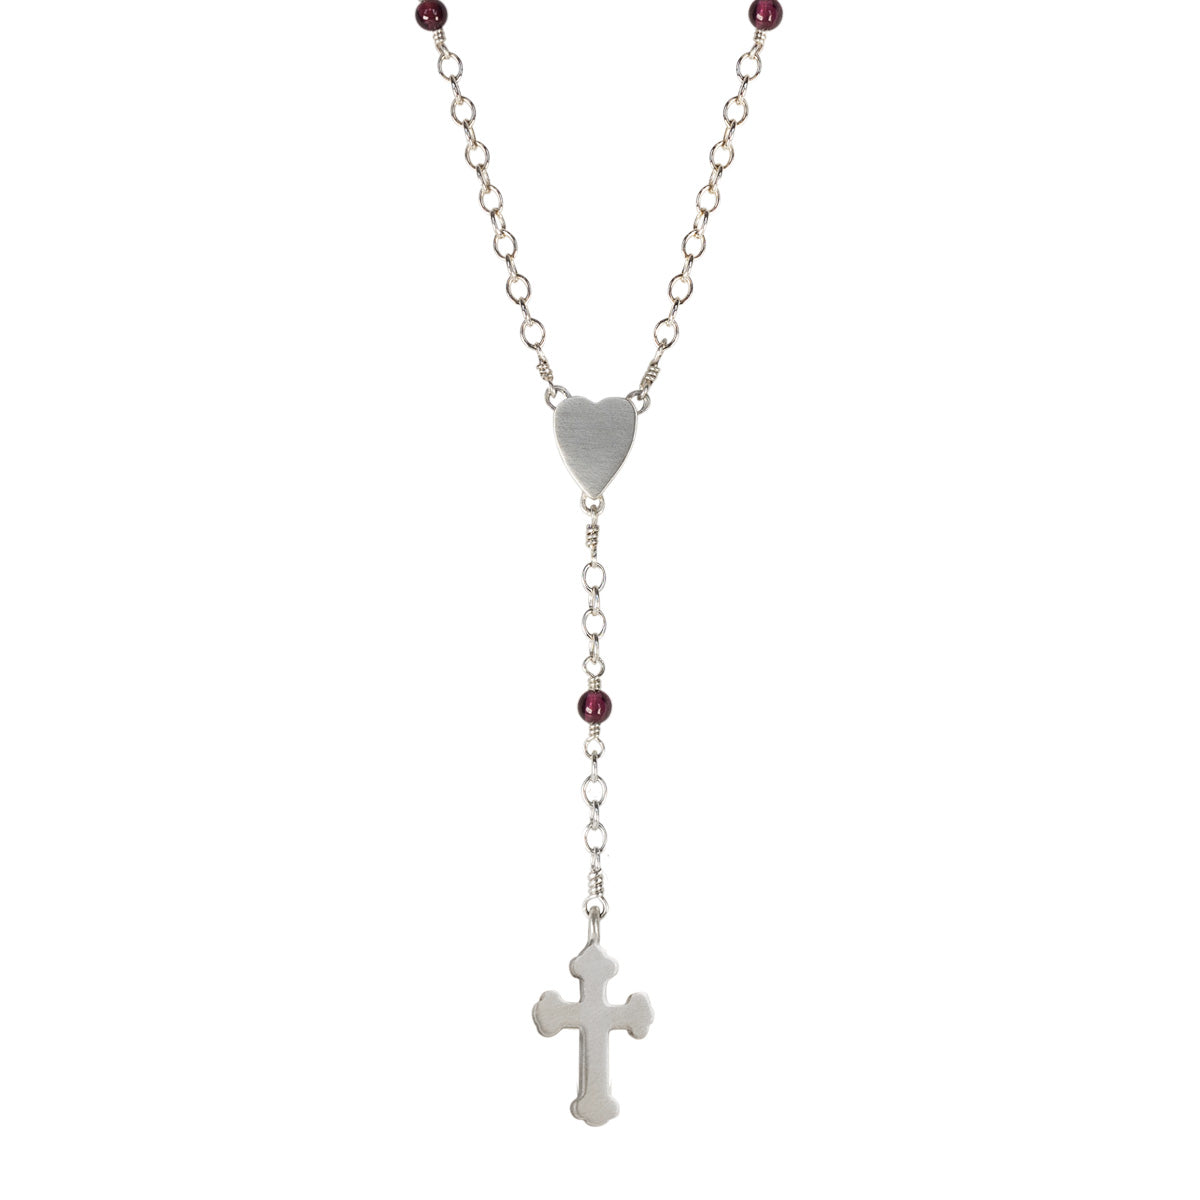 Sterling Silver Heart and Cross Rosary Necklace on Garnet Chain